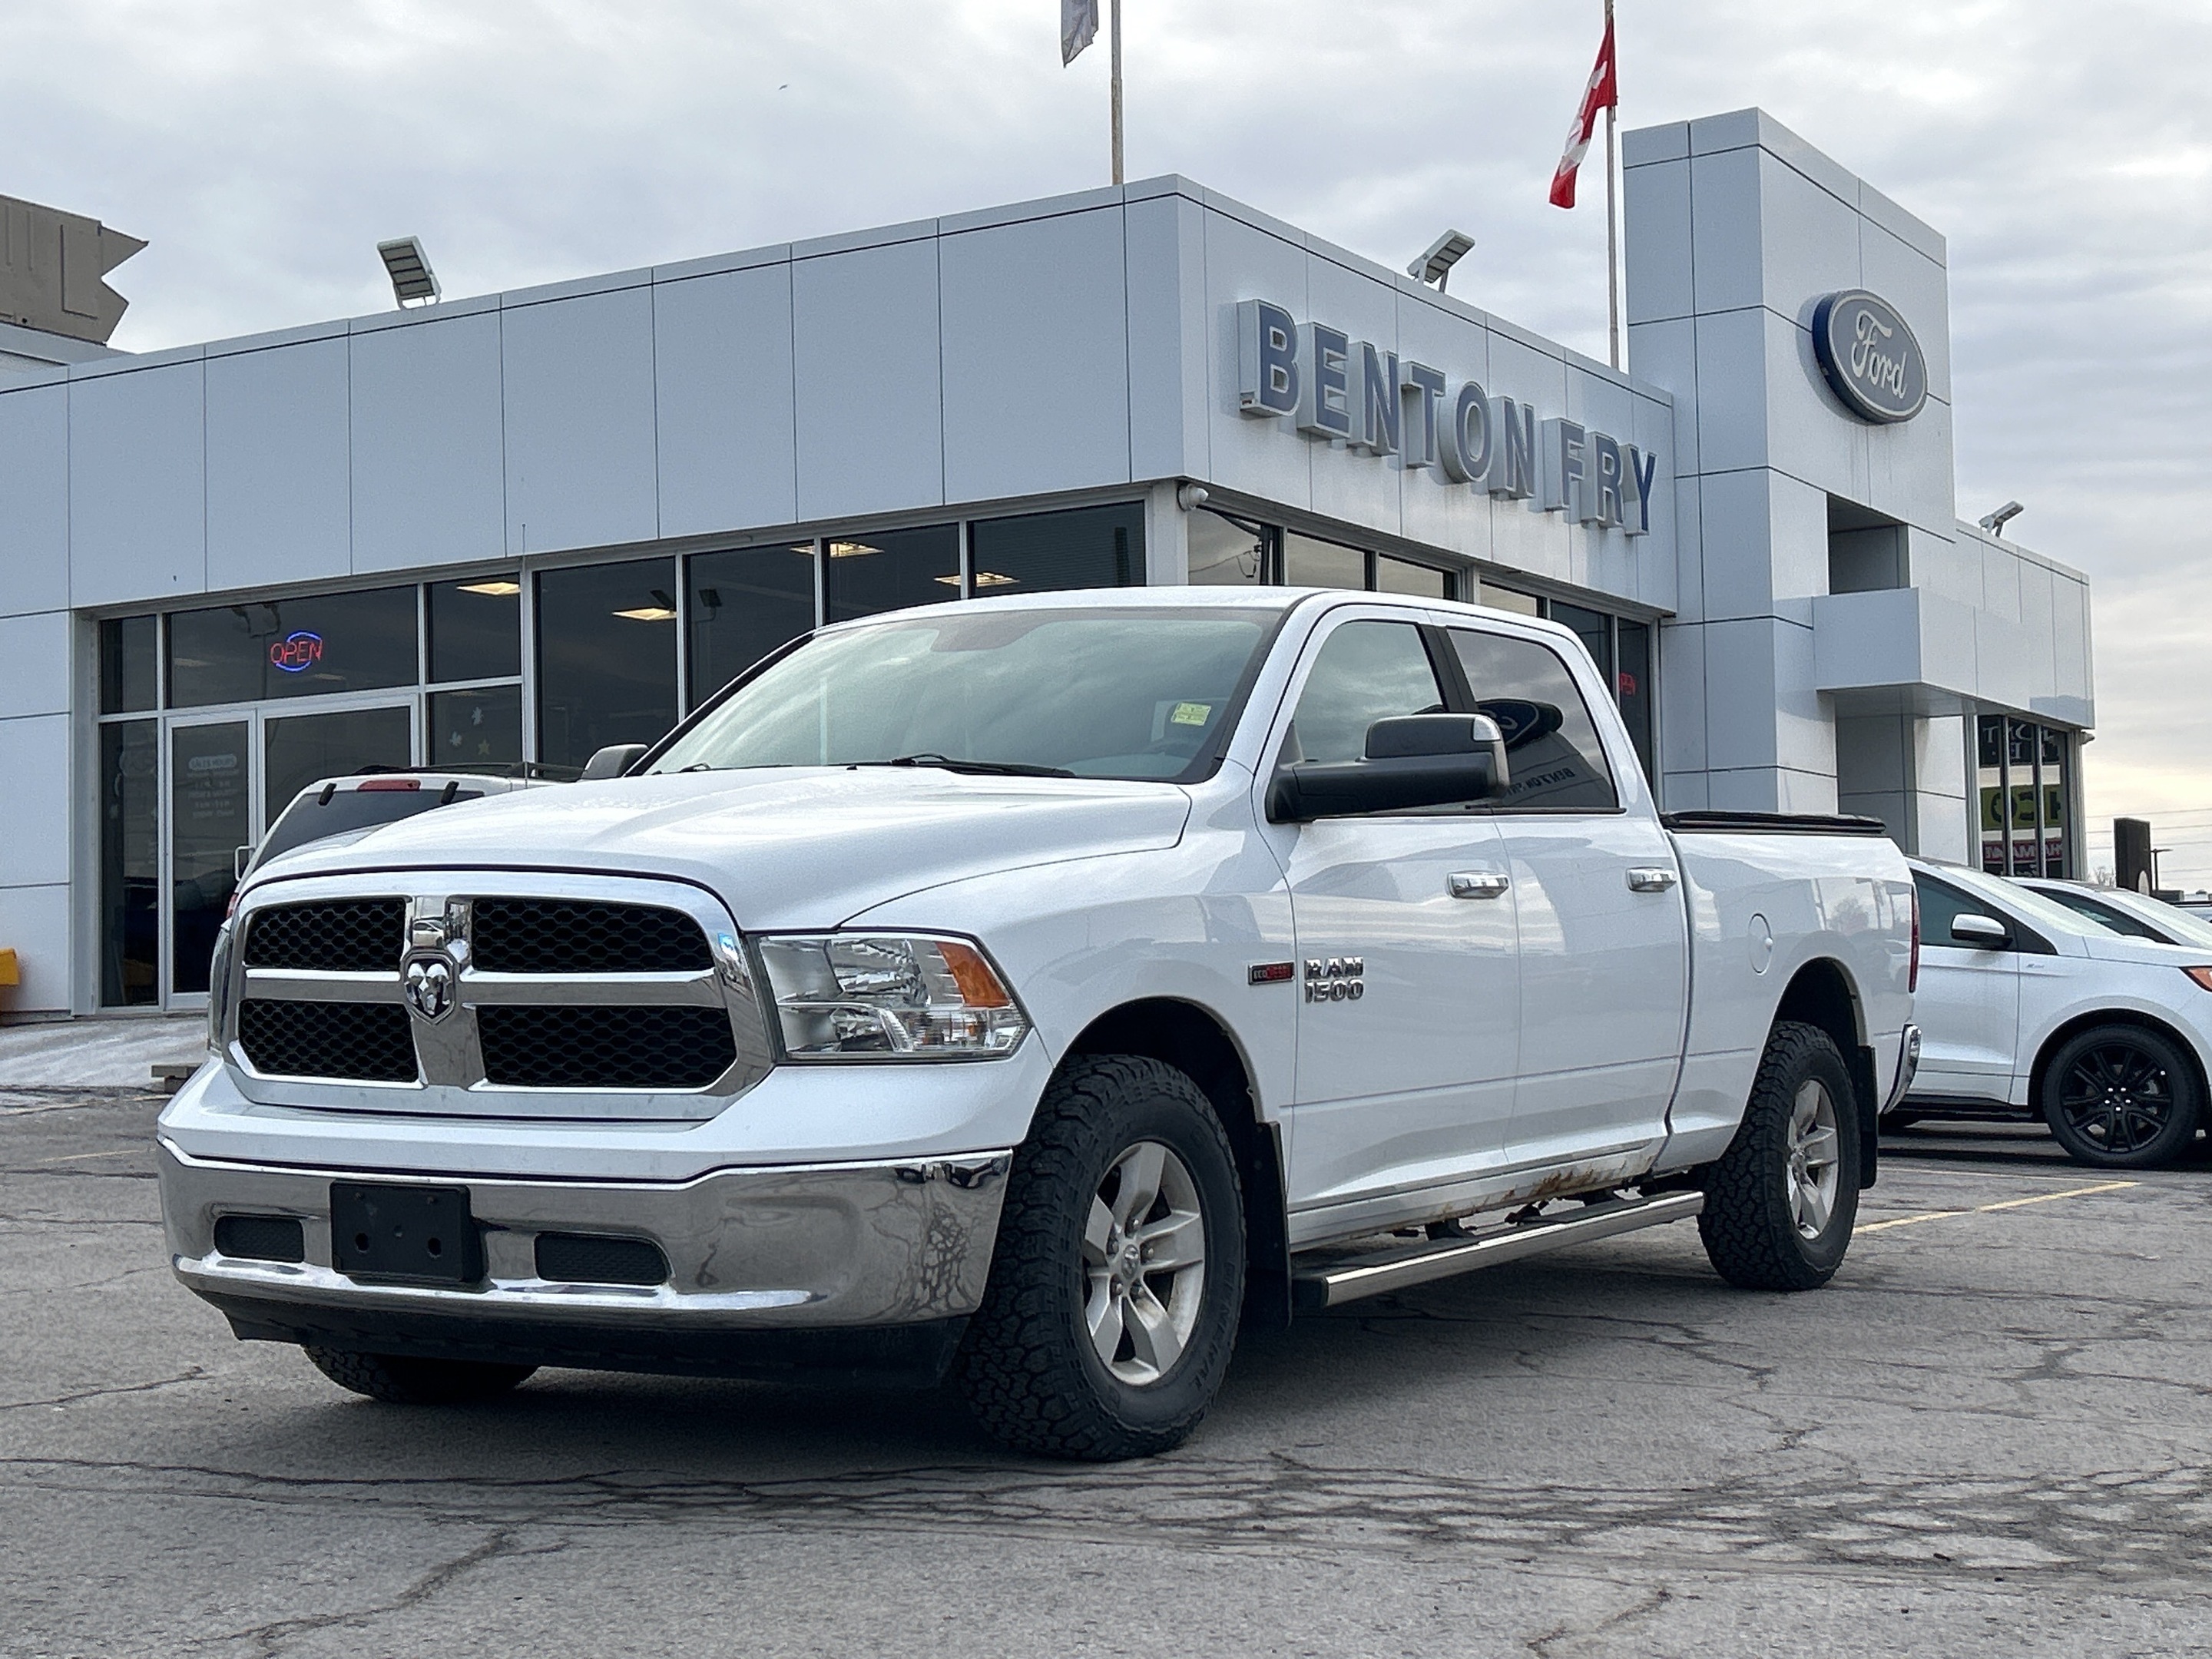 2015 Ram 1500 SLT - 3.0L Eco Diesel Certified and Detailed, Read